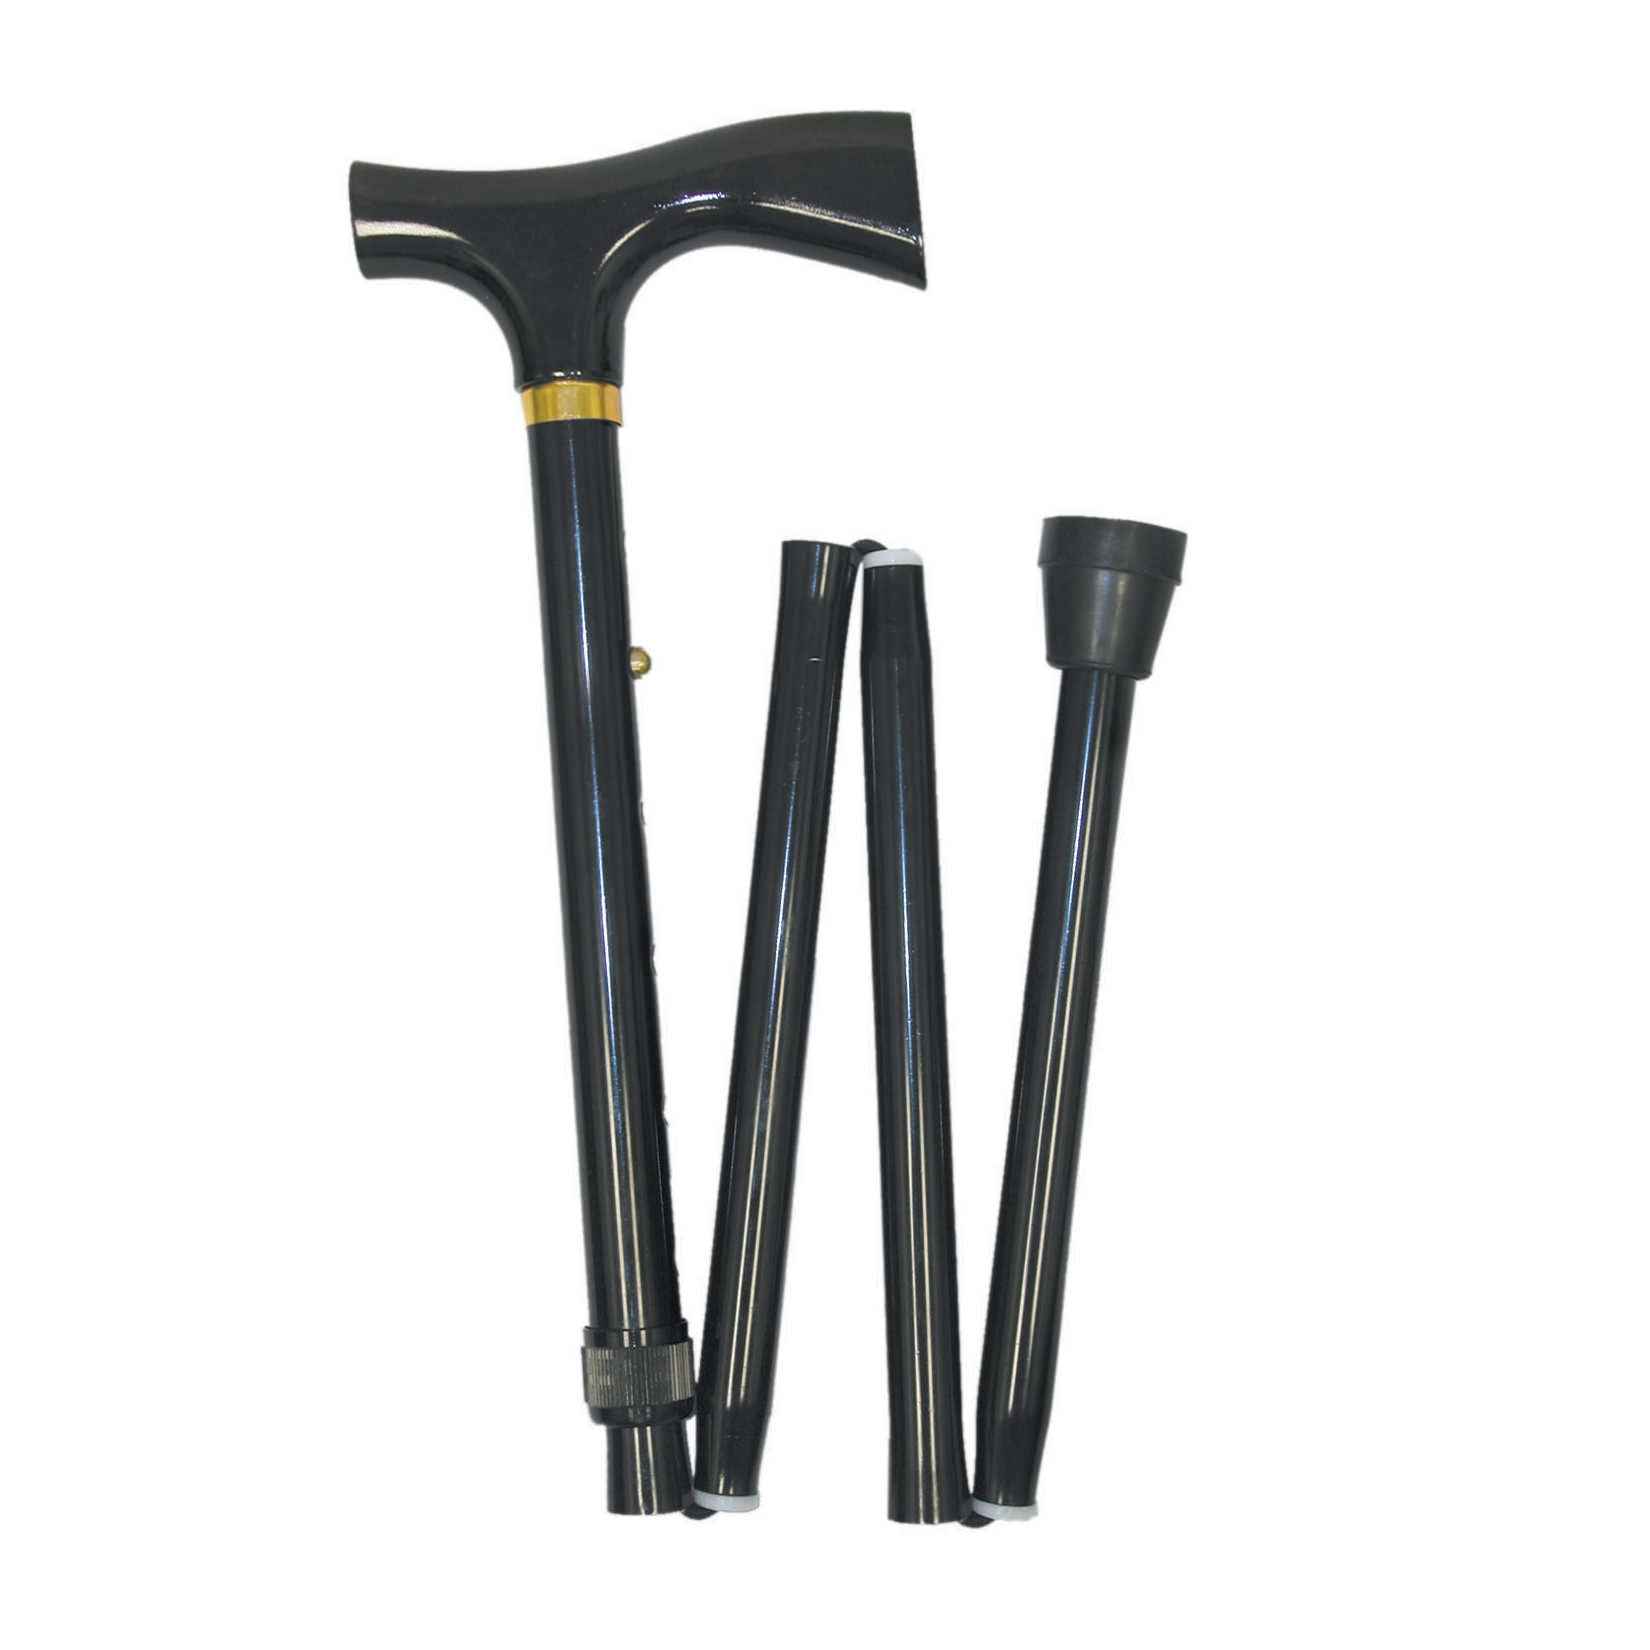 Mabis Adjustable Folding Cane with Derby Handle